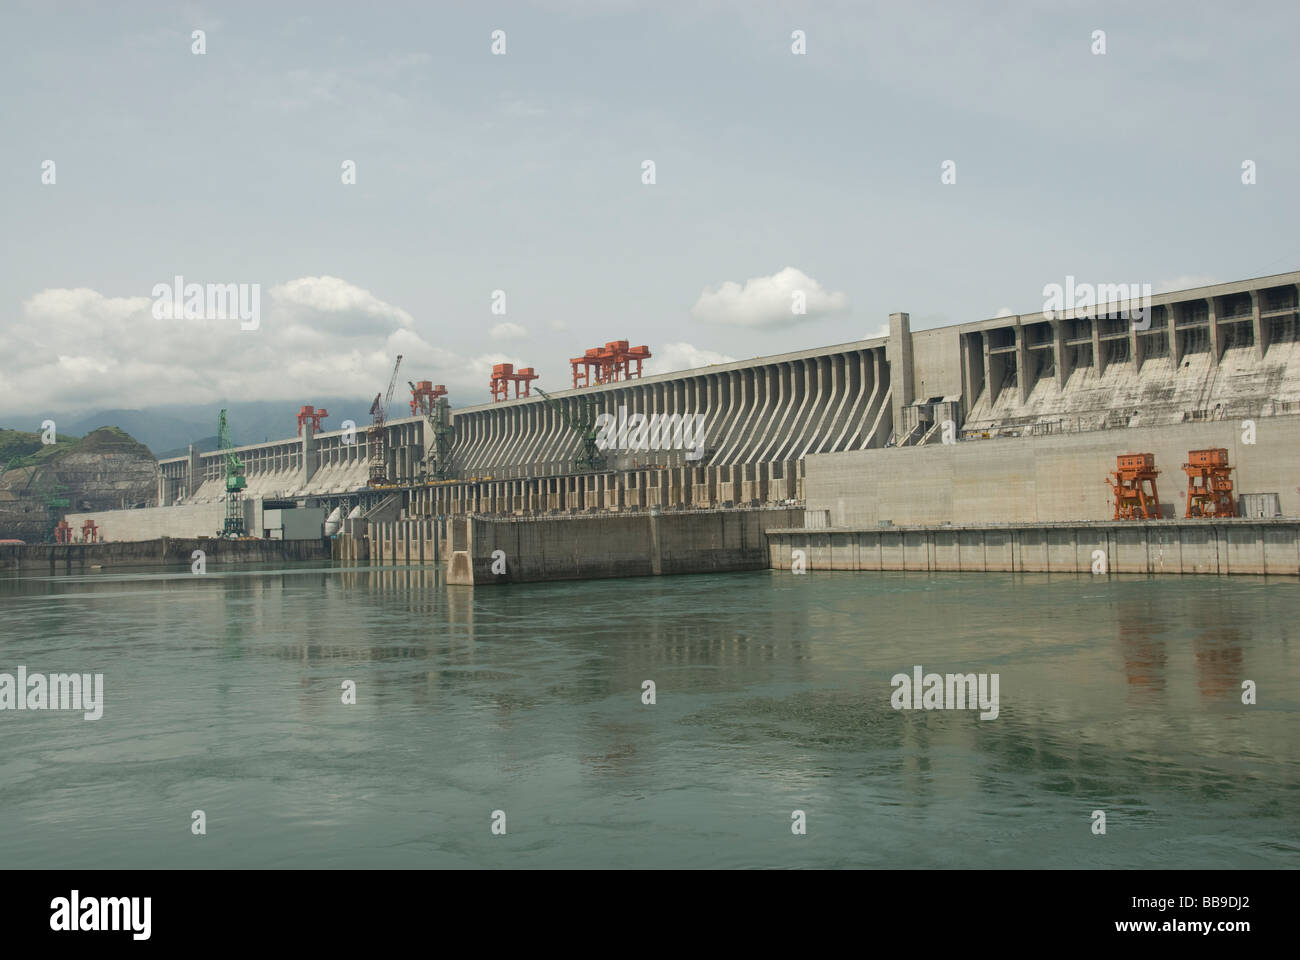 Yangtze Three Gorges Dam Project front side view, Yichang, Hubei Province, People’s Republic of China Stock Photo